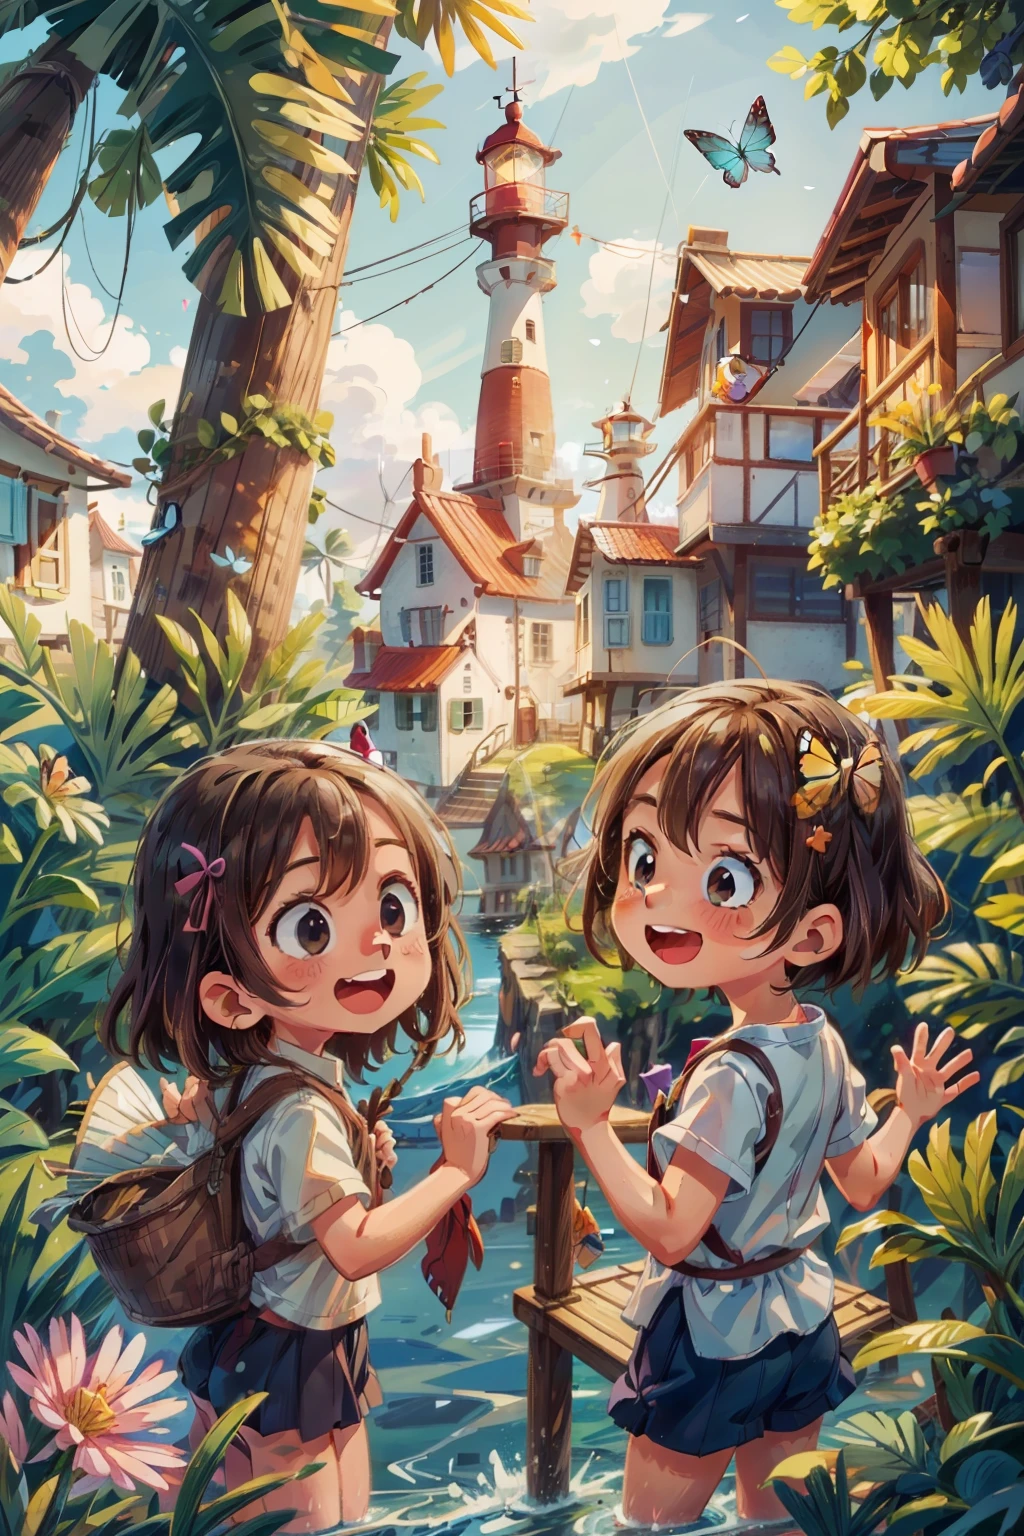 Generates an image of two happy  very young girls sailing on a boat, waves, sea, sky with white clouds. colorful butterflies, lighthouse in the background,